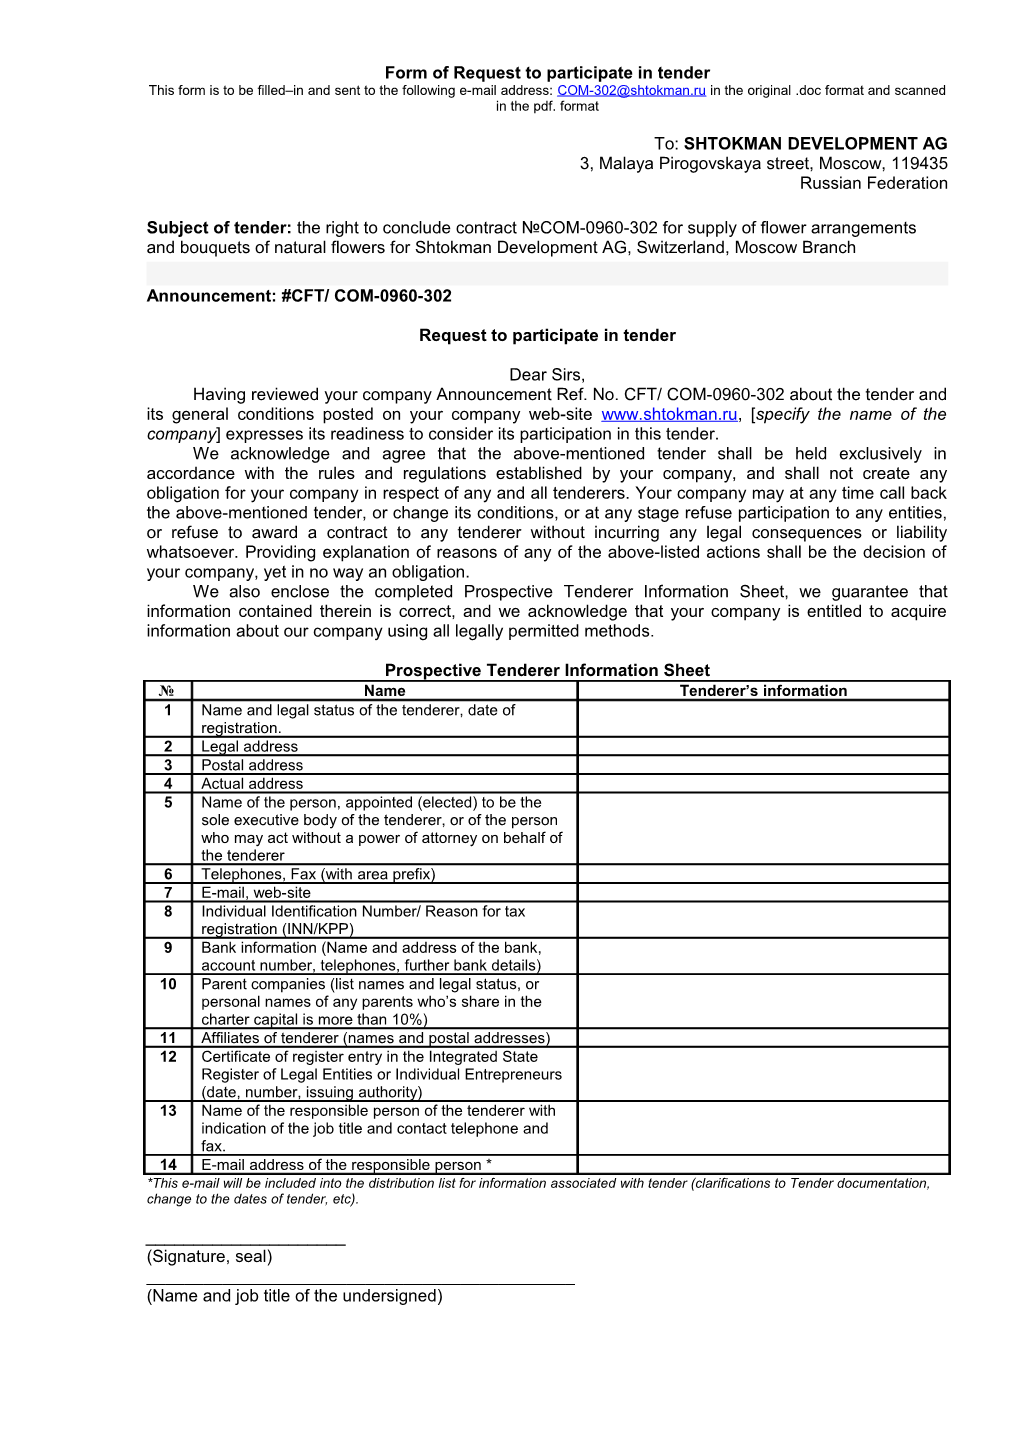 Form of Request to Participate in Tender